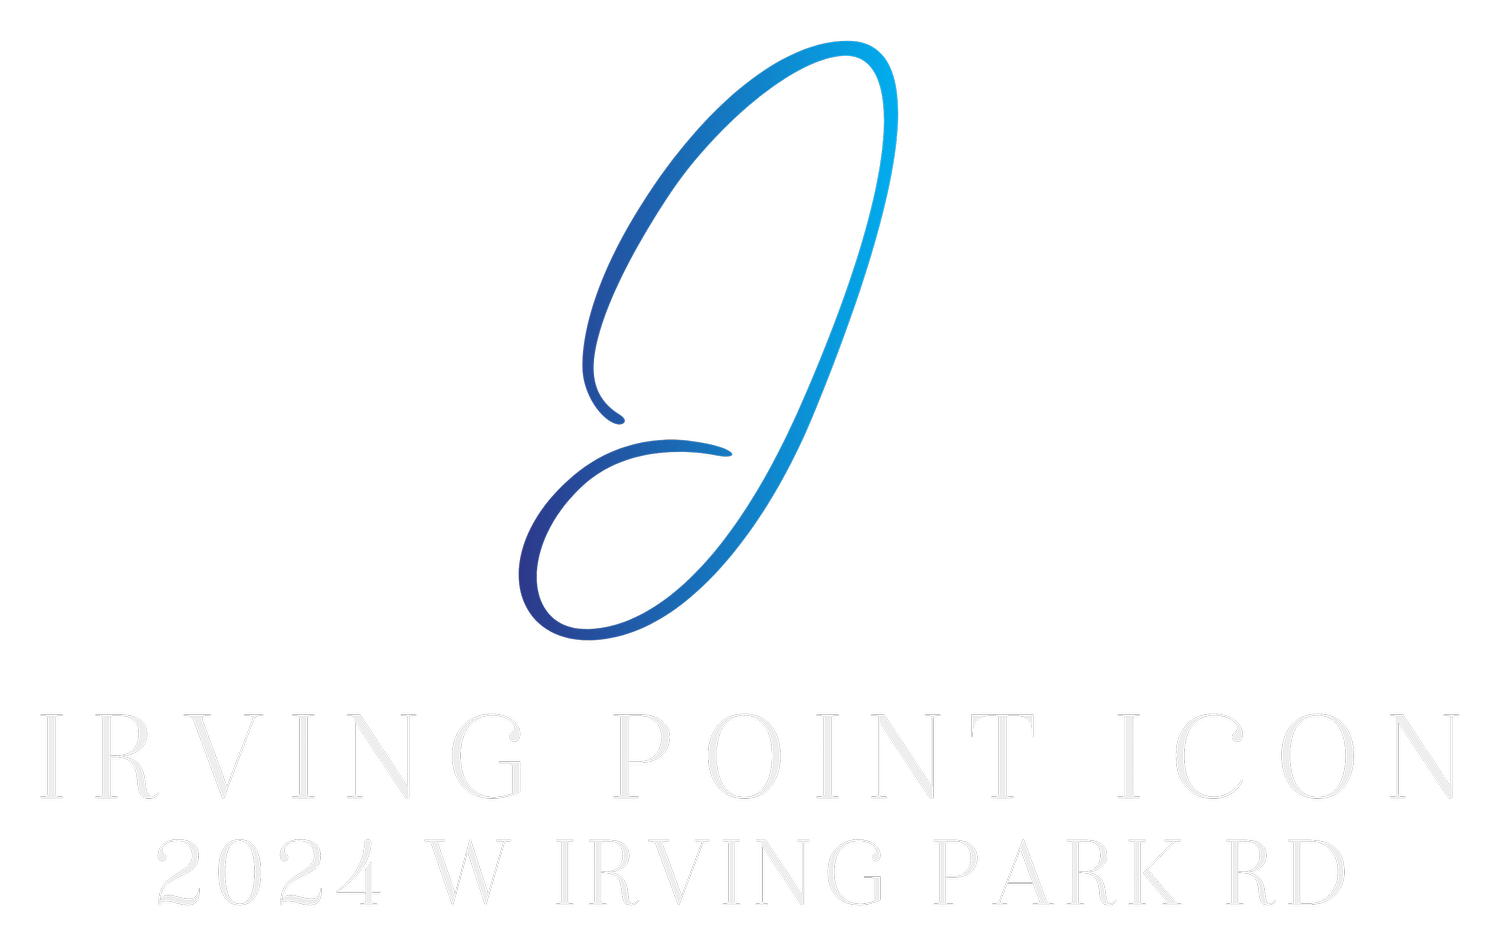 Irving Point Icon 